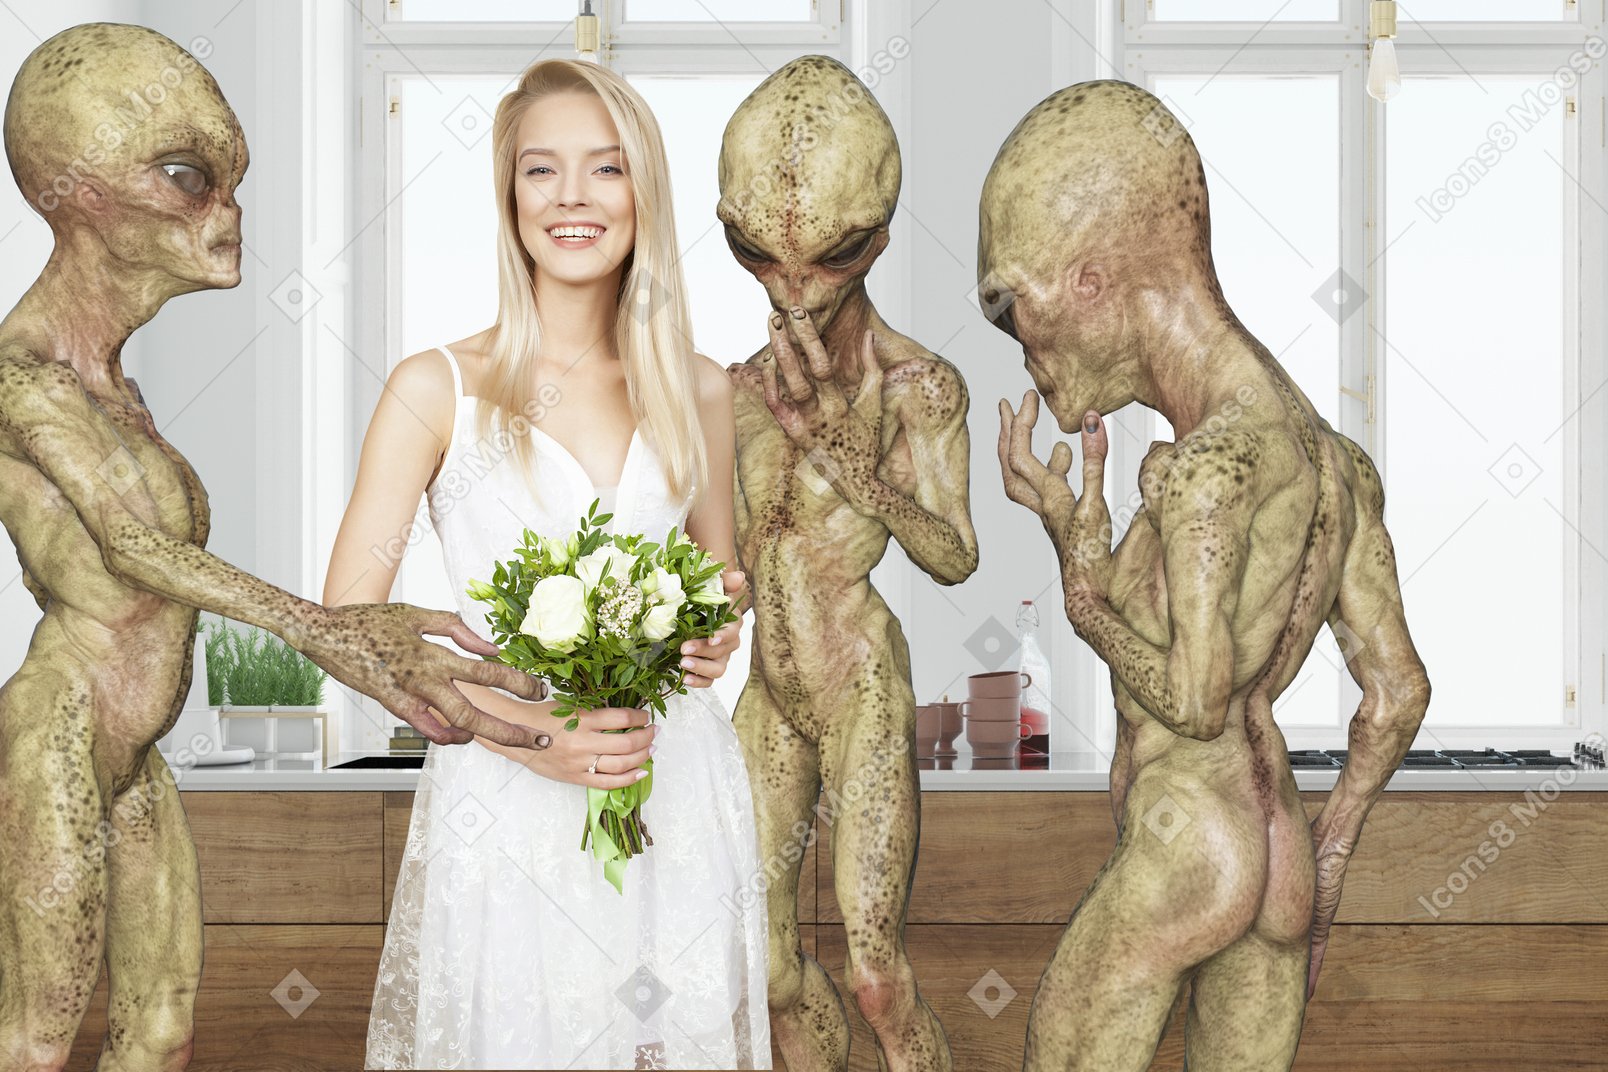 Aliens looking at woman in white dress holding bouquet of flowers